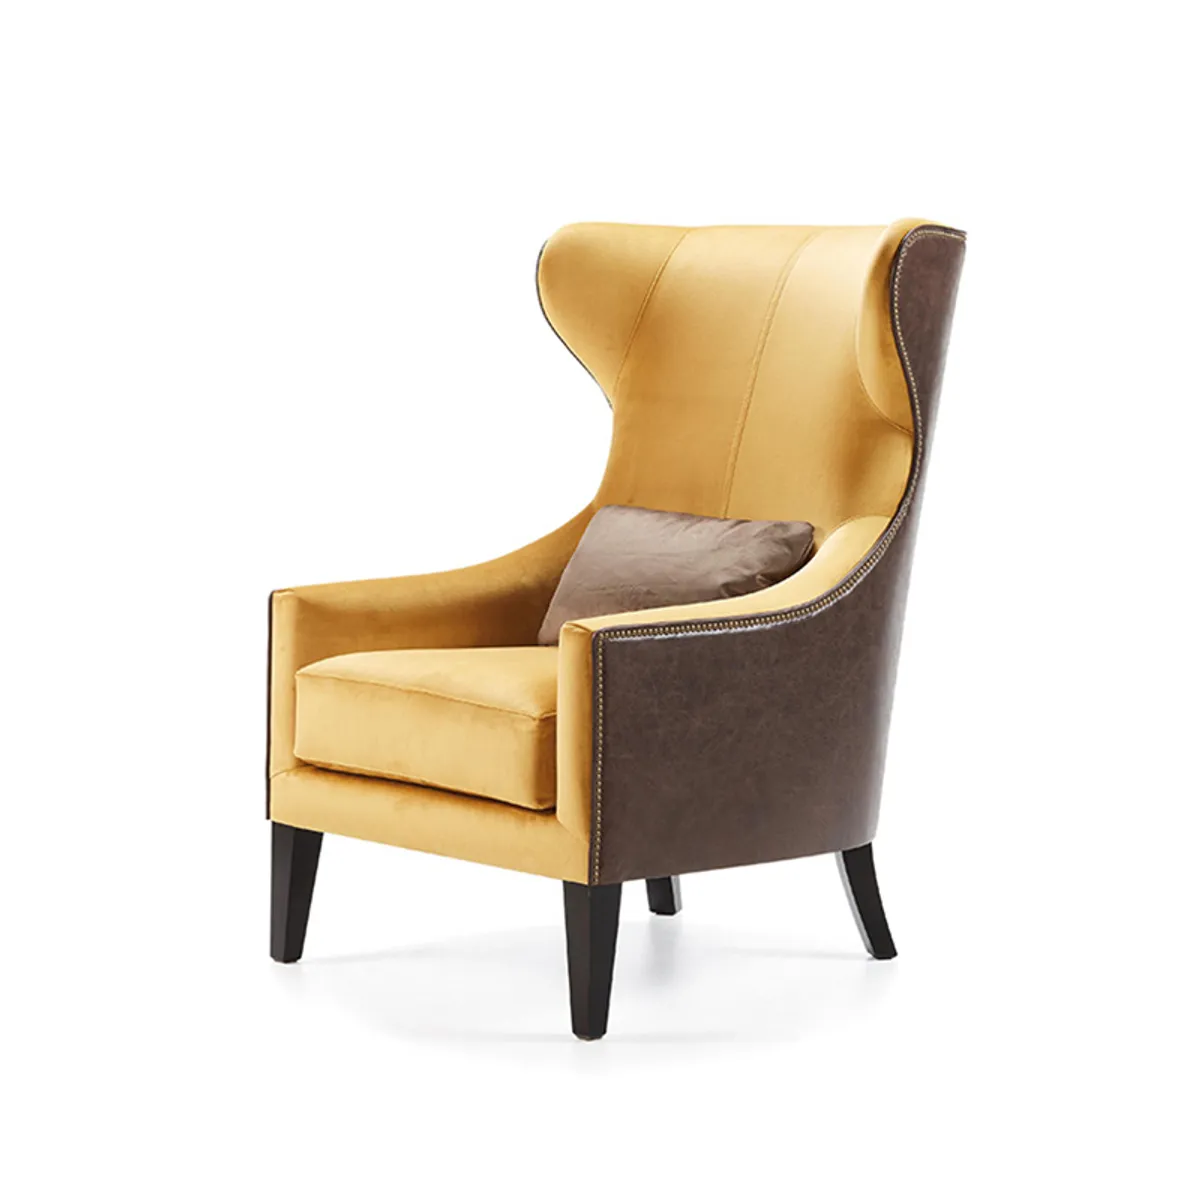 Vala Wing Back Chair Furniture For Boutique Restaurants And Cafes 1913